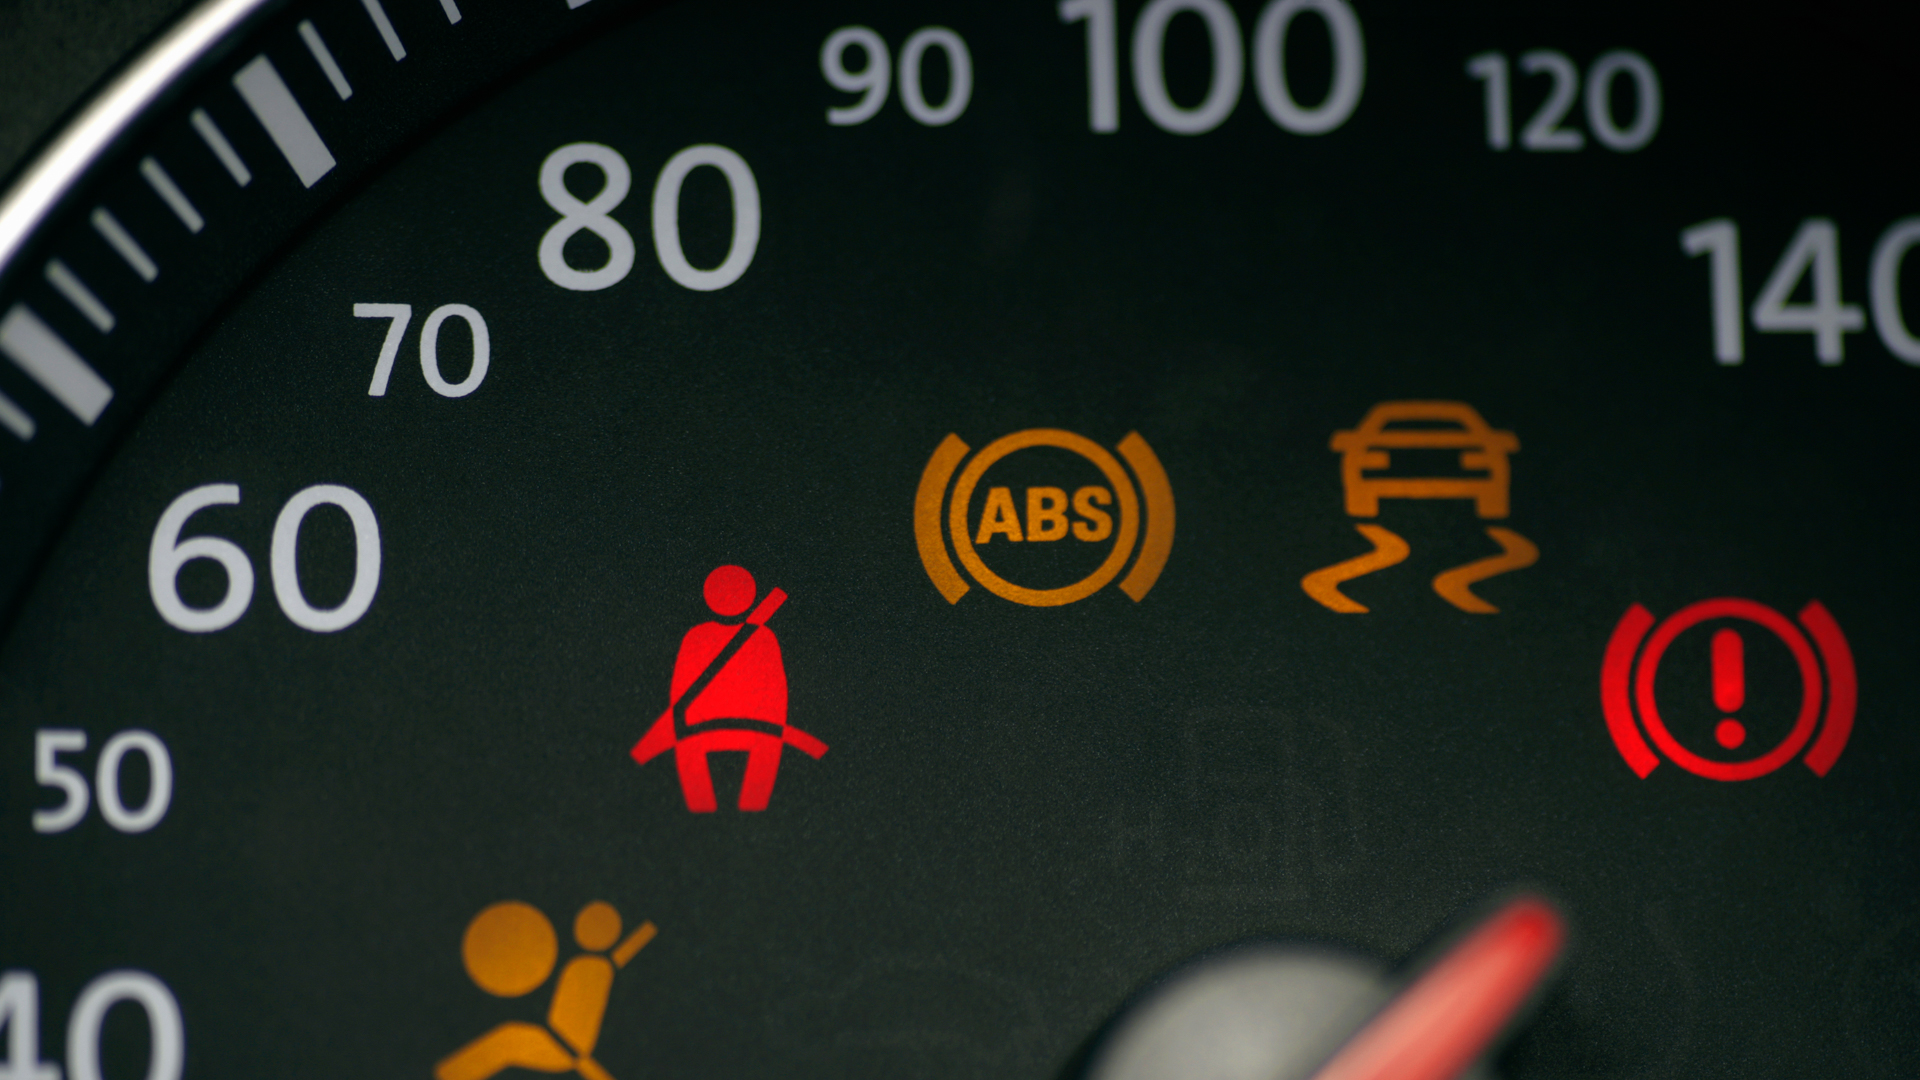 Updated iPhone iOS Can Help Decode Your Car’s Dashboard Warning Symbols